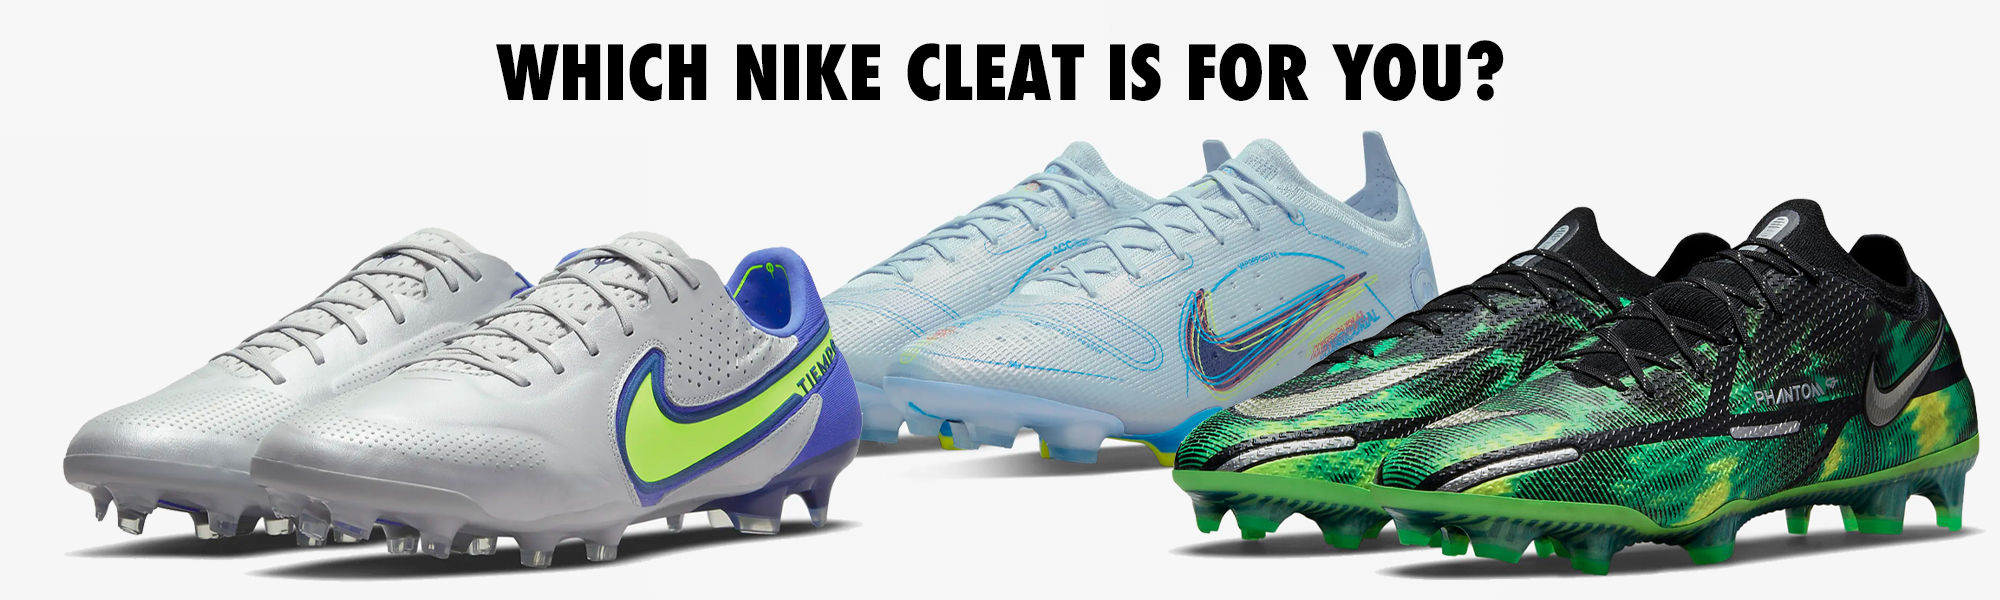 Which Nike Cleat Should You Get?